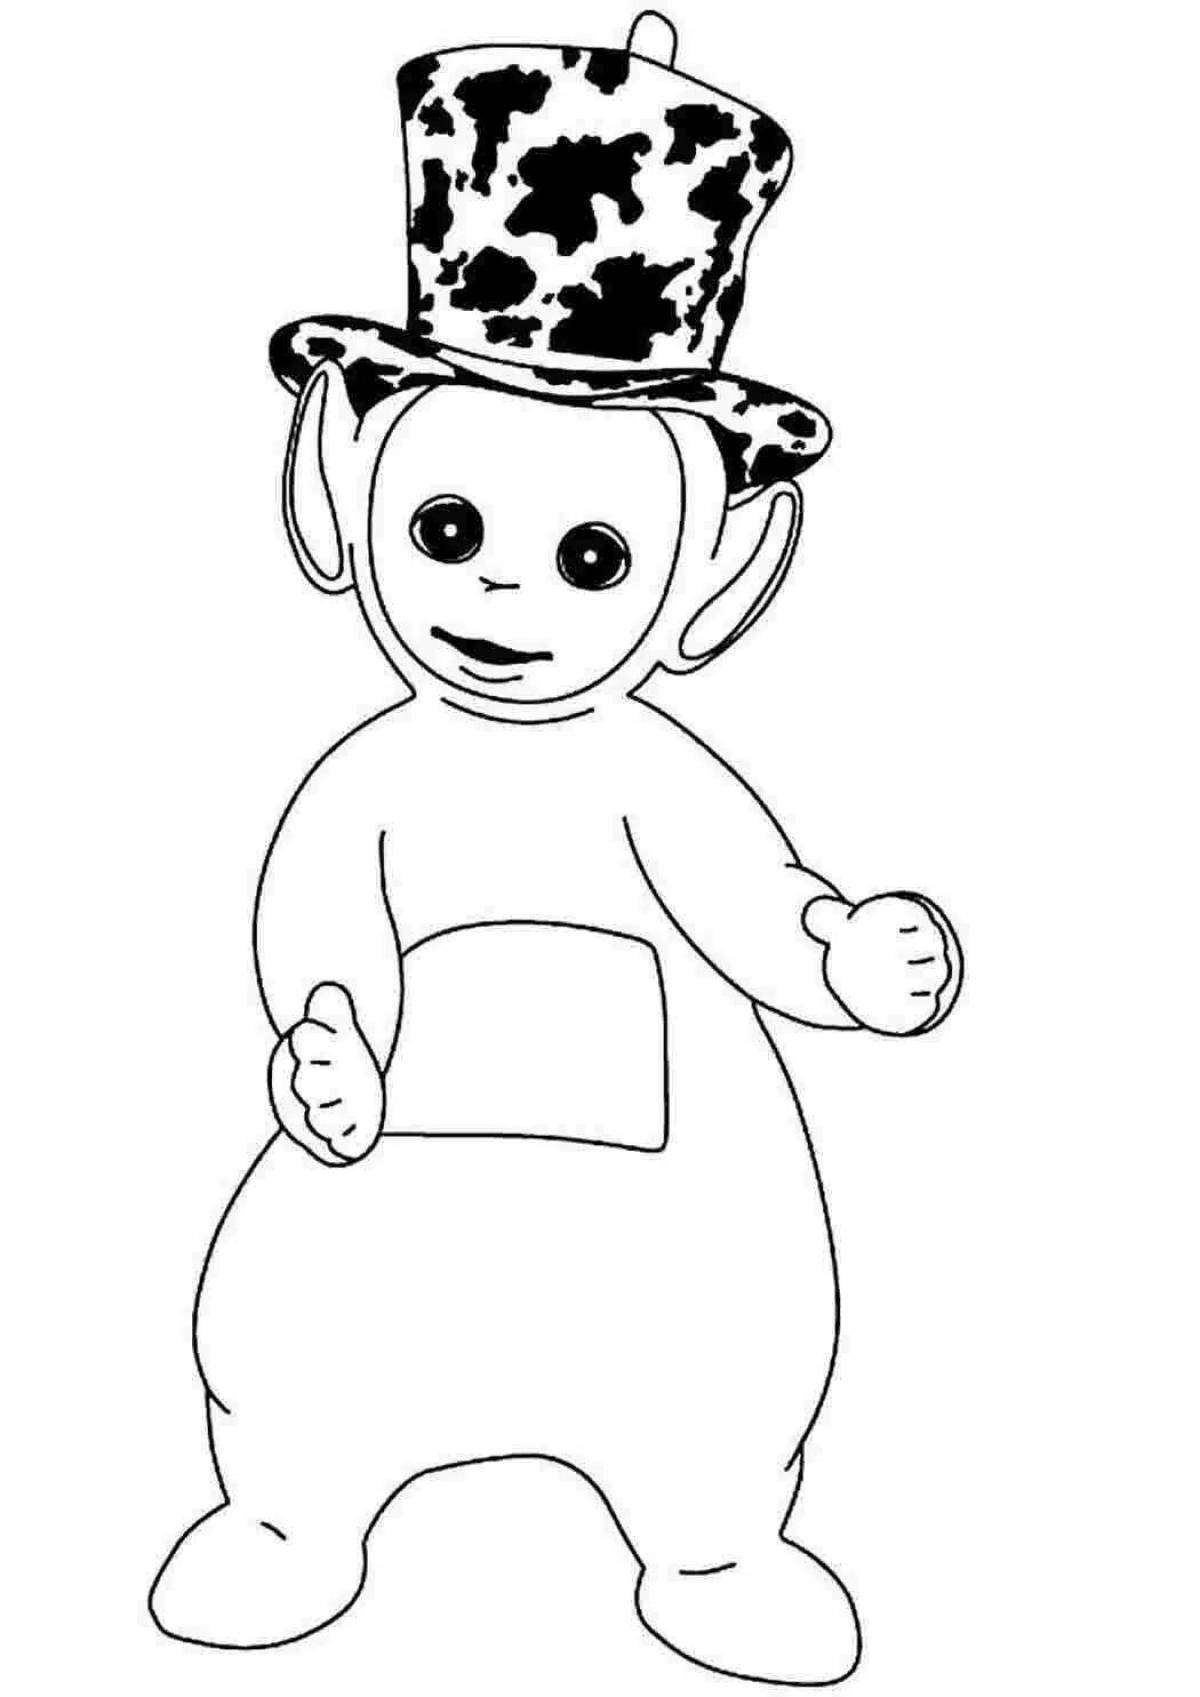 Colorful slender-tubbies coloring page